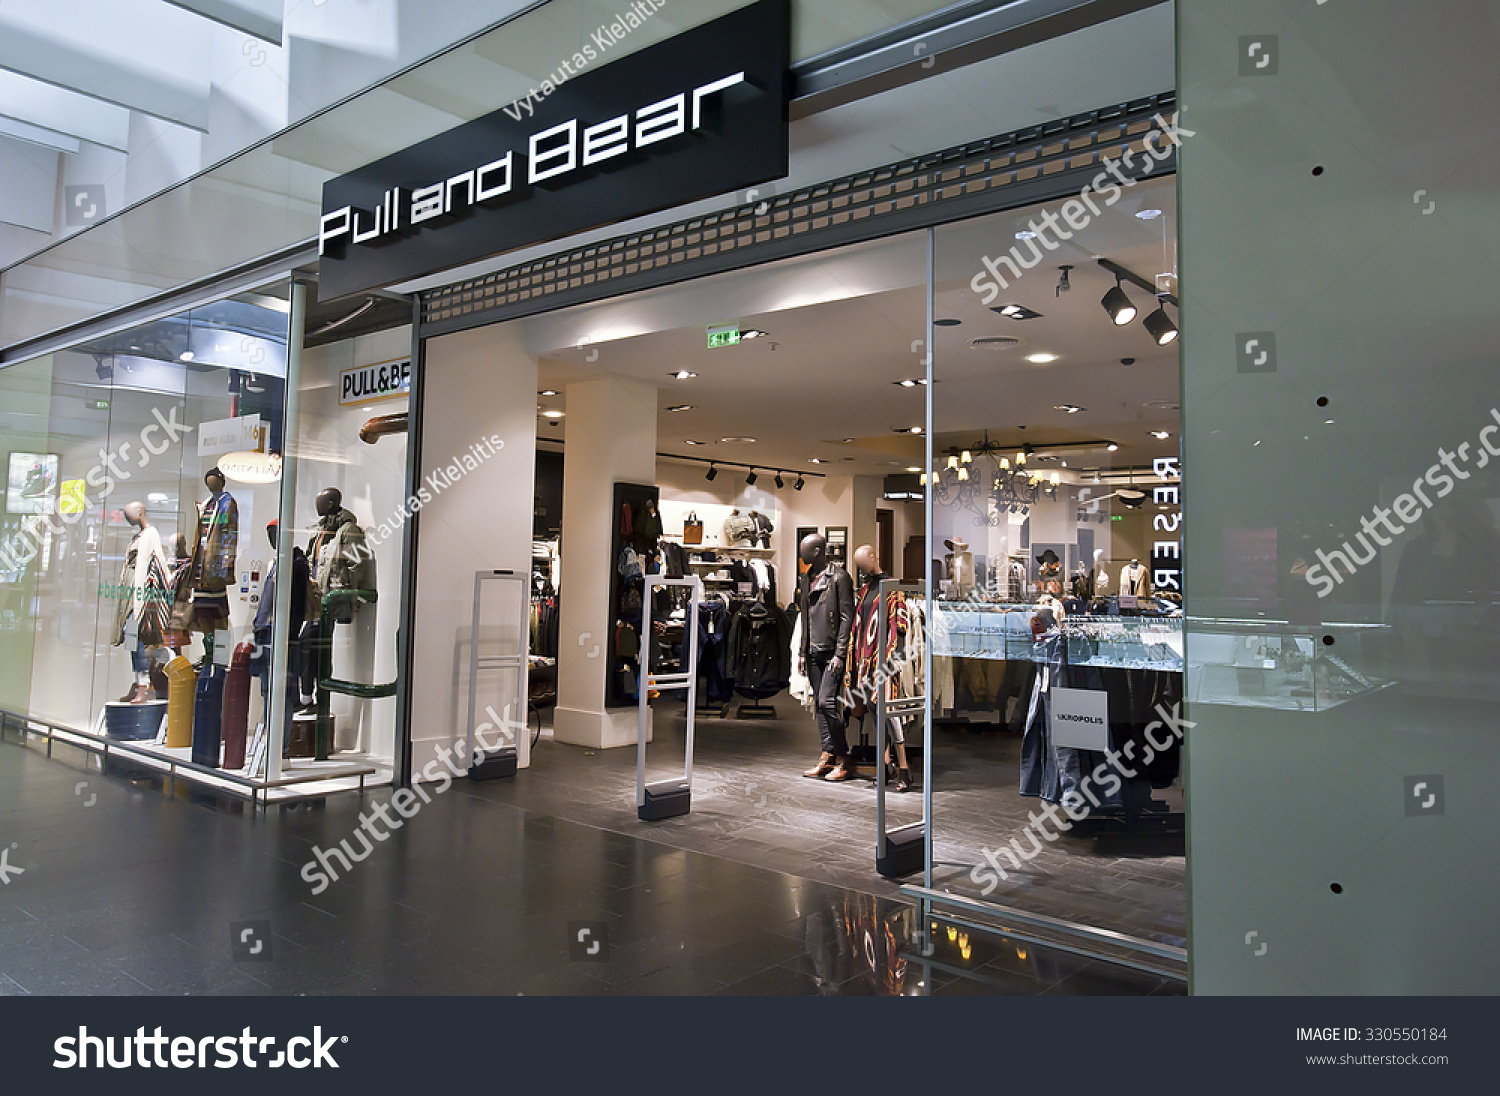 Pull and bear lithuania